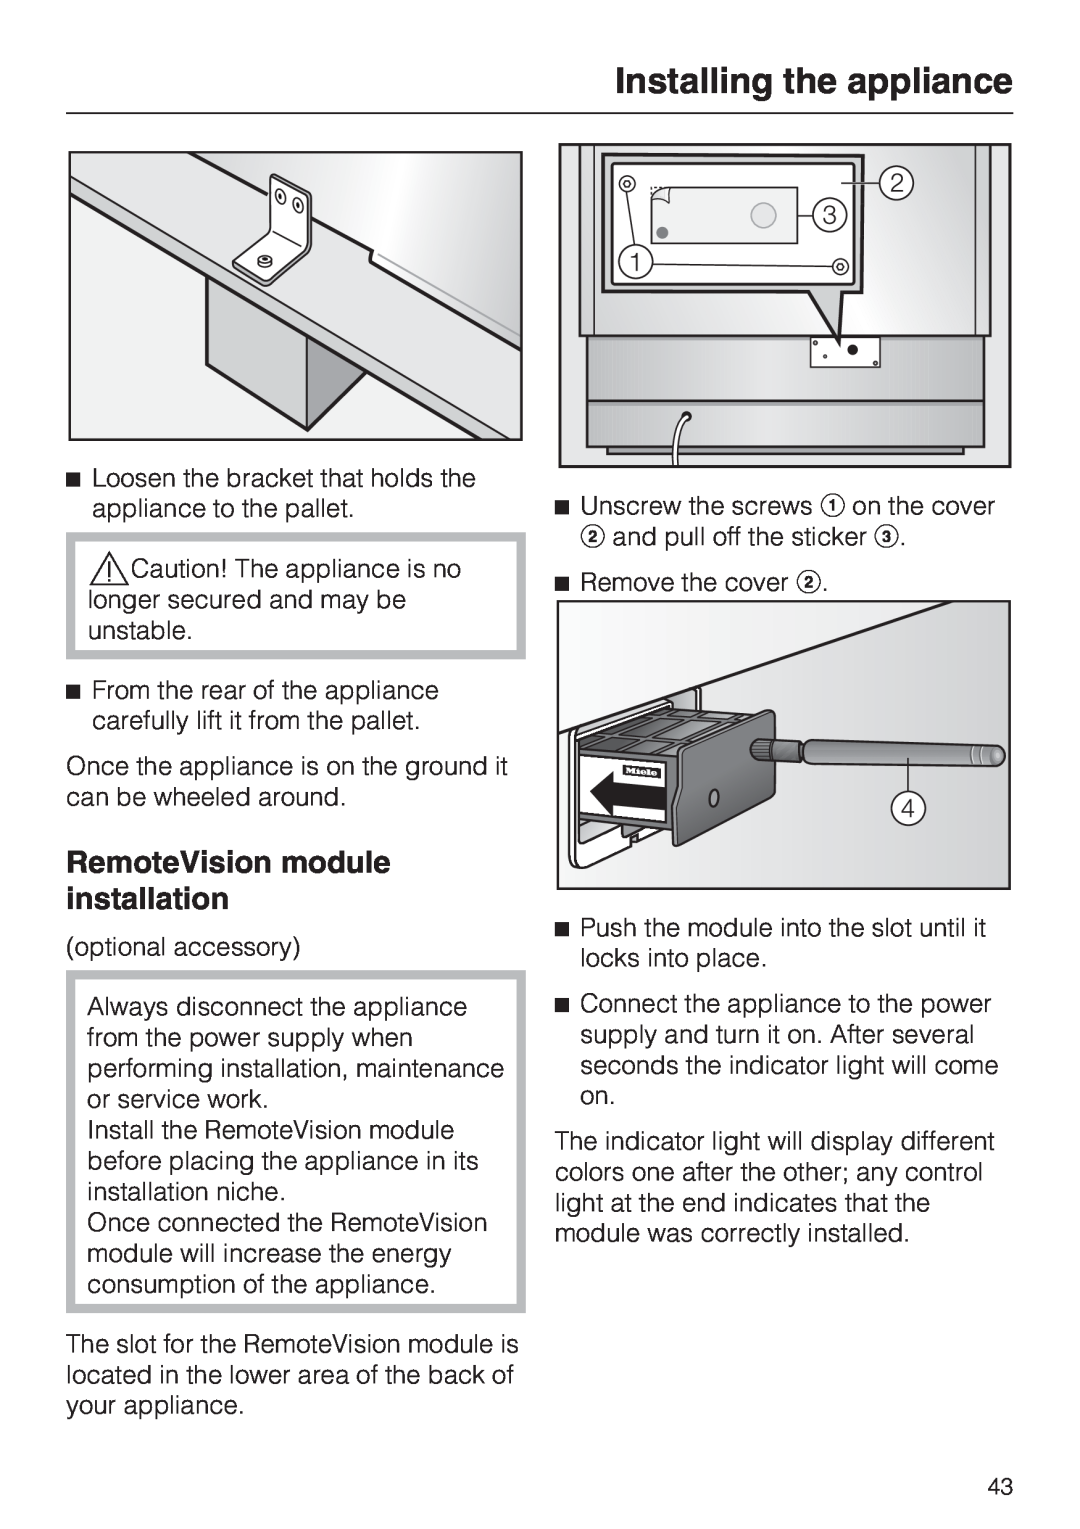 Miele K1811SF, K1801SF, K1901SF, K1911SF installation instructions RemoteVision module installation, Installing the appliance 